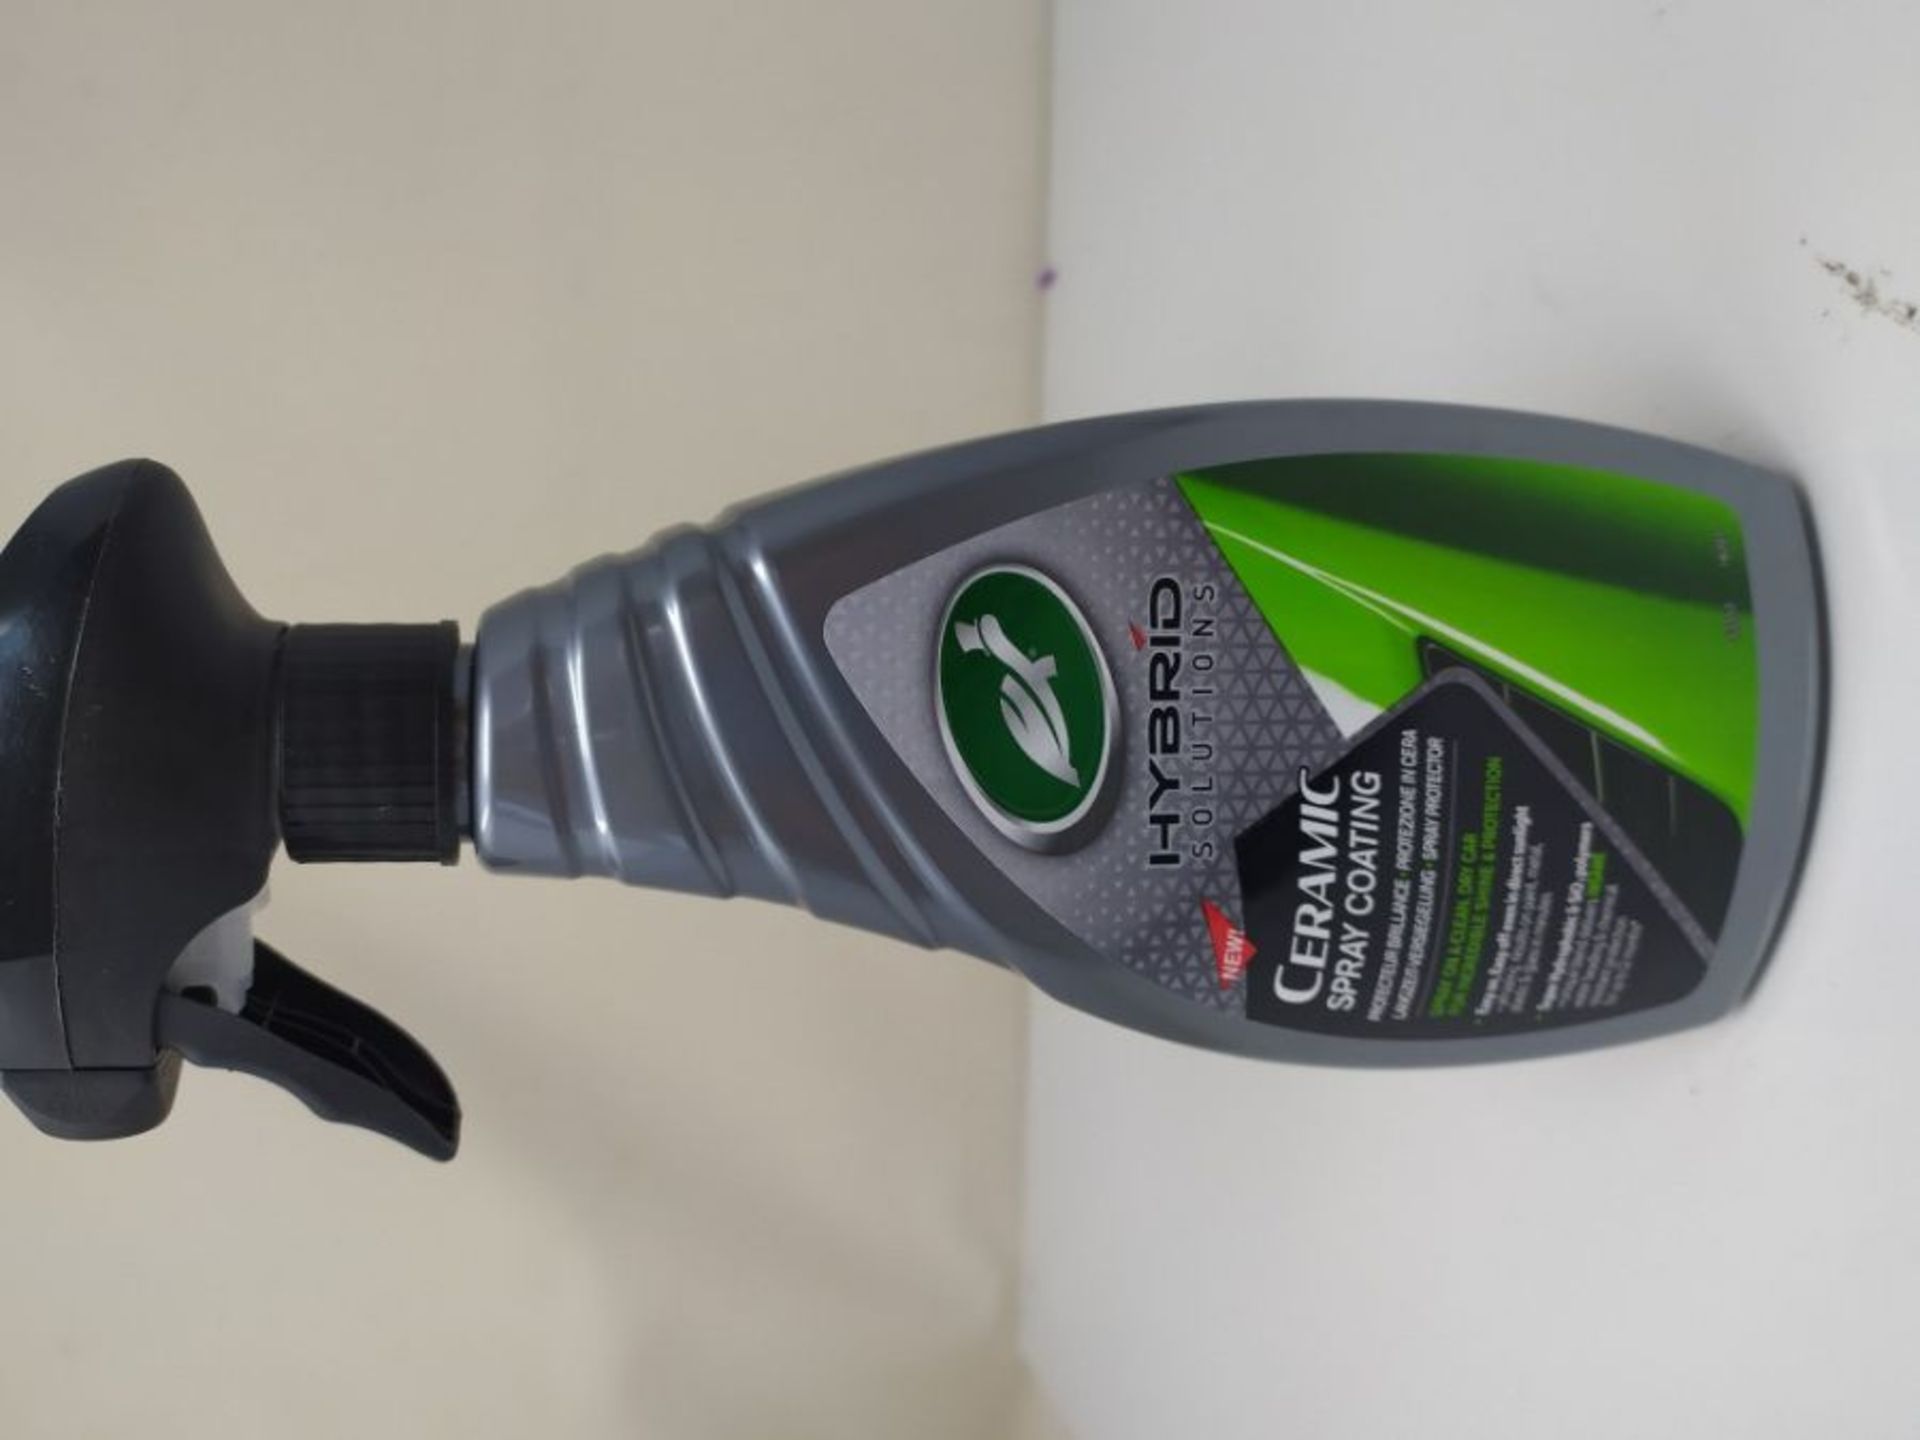 Turtle Wax 53342 Hybrid Solutions Ceramic Wax Spray Coating For Cars 500ml - Image 2 of 2